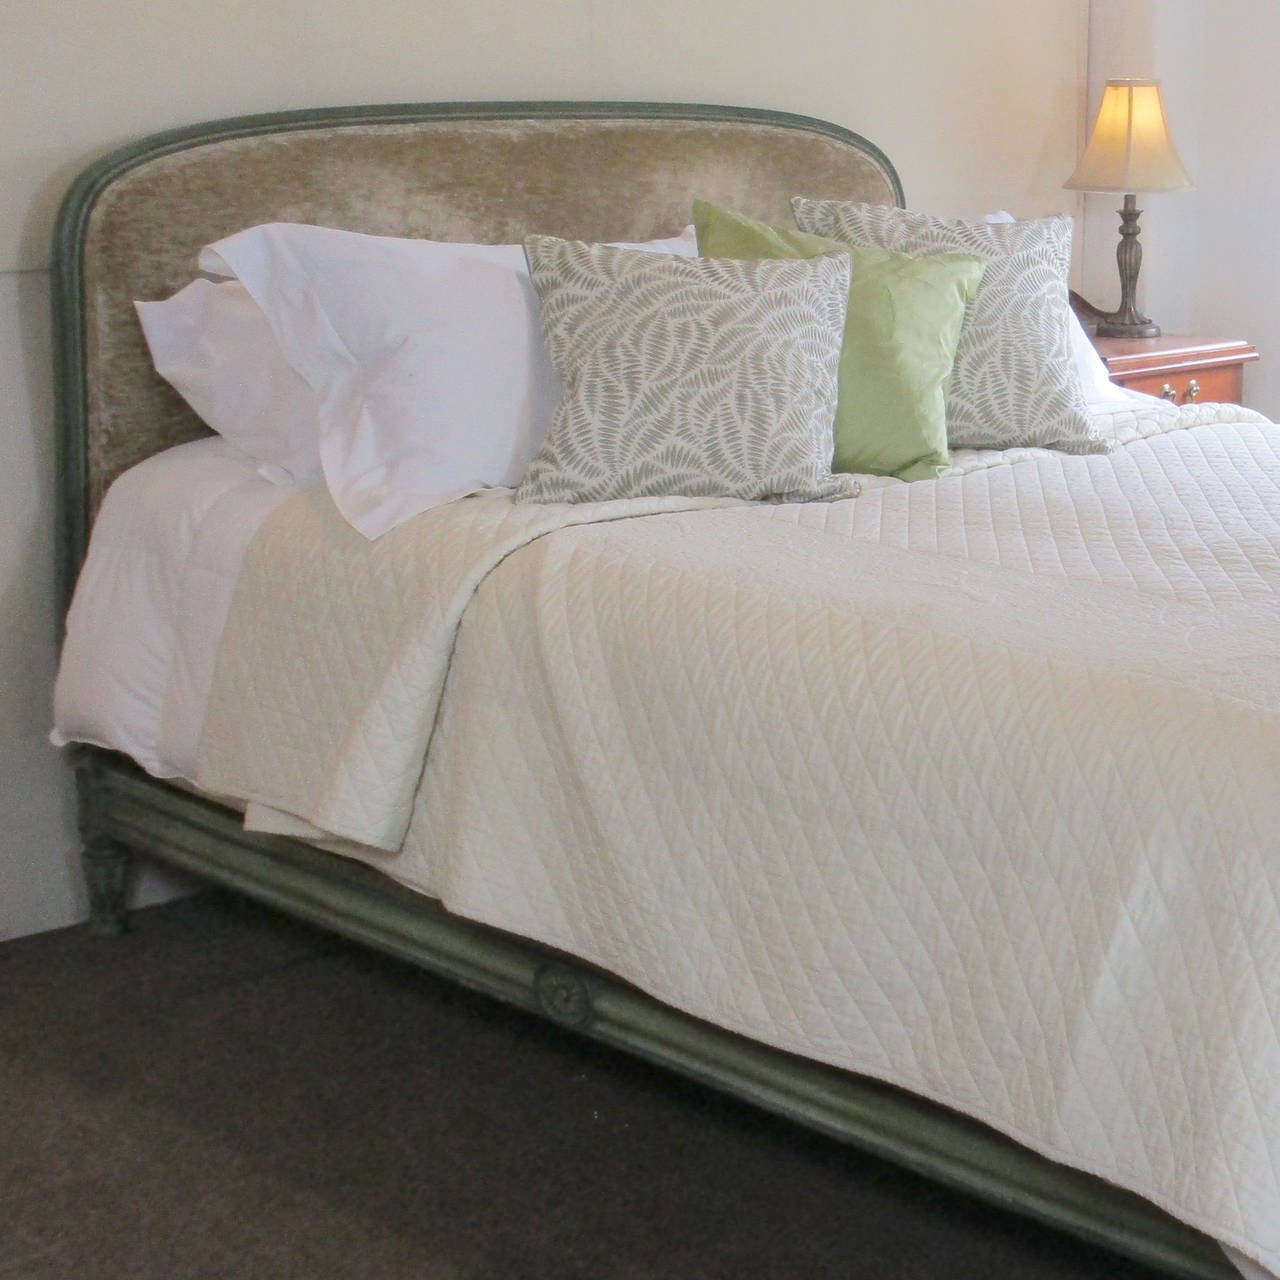 An upholstered bedstead with original painted framework on it’s original side runners. The panels upholstered with this velour style fabric. It can be reupholstered if required for additional cost.

The bed is shown with a 5 ft wide bed base and